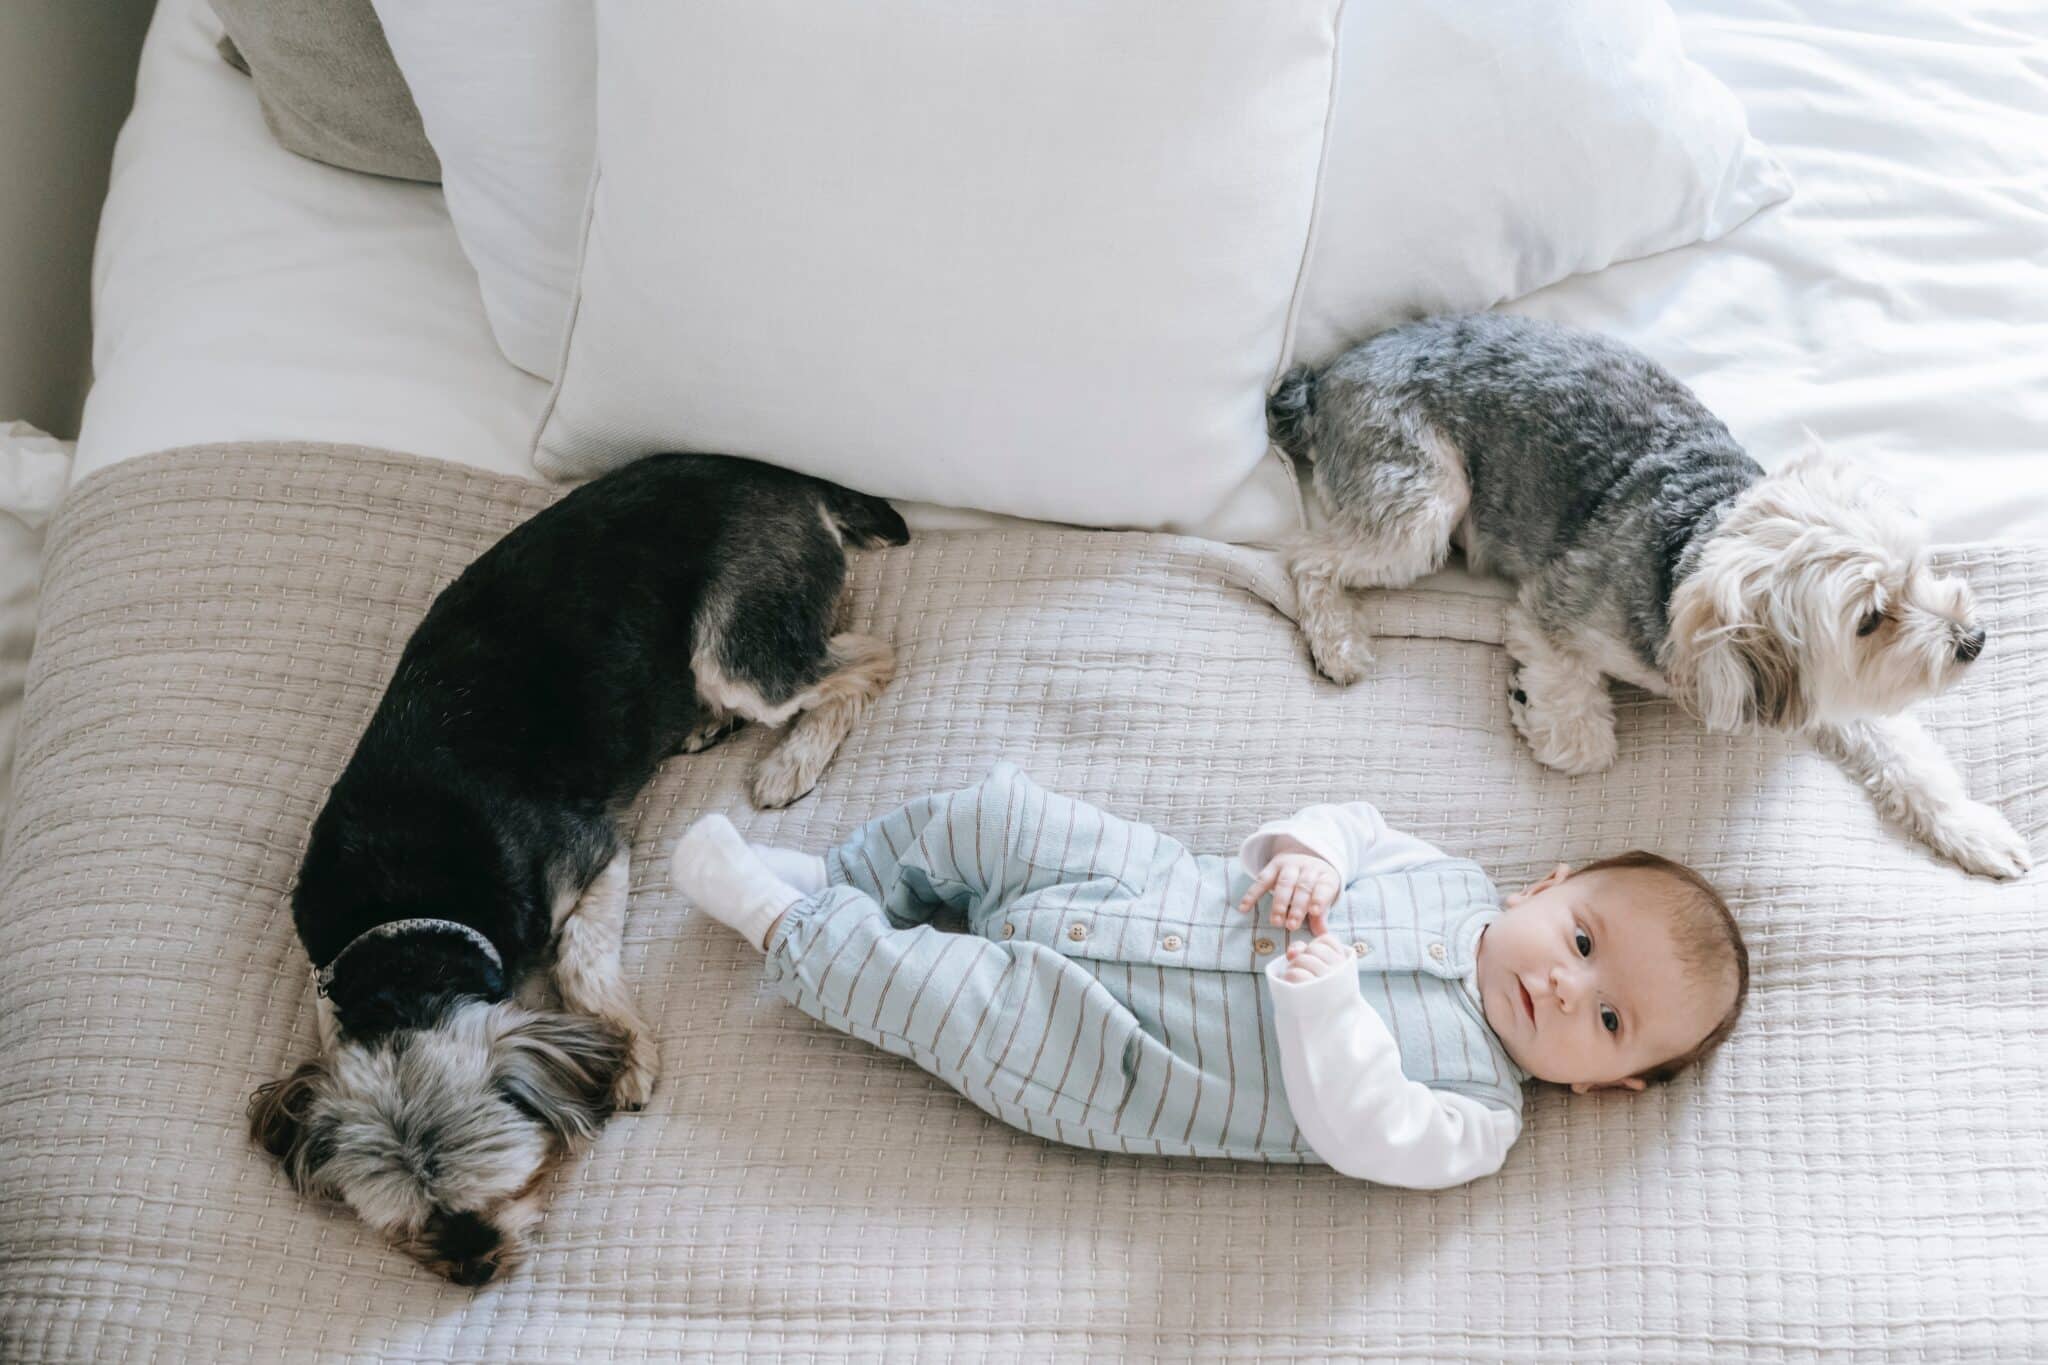 Baby resting in a bed with two small dogs.